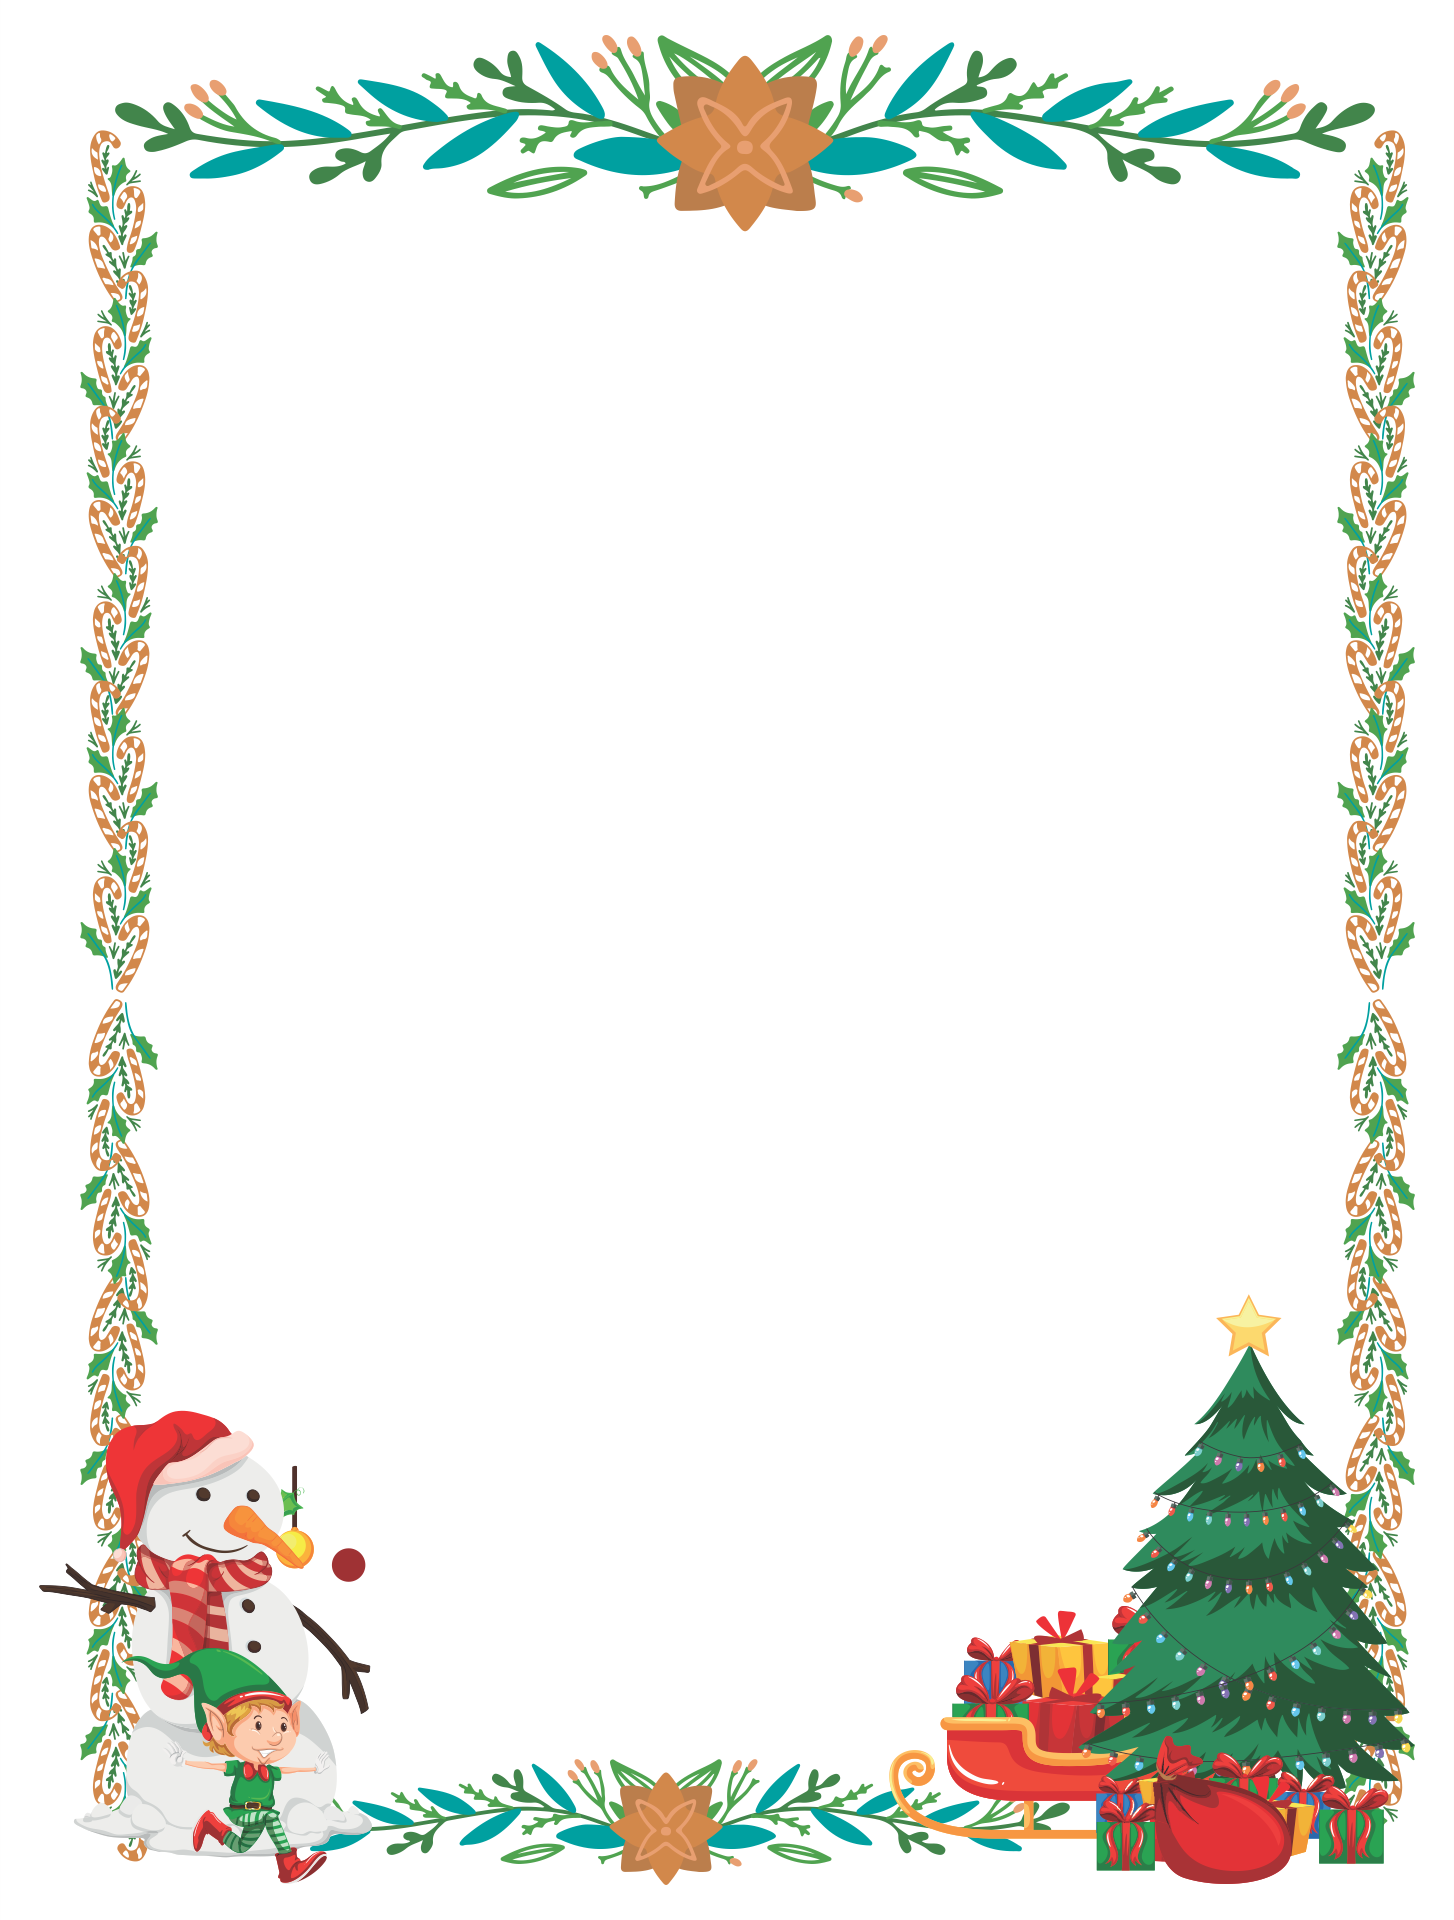 7 Best Images of Printable Christmas Borders And Background Free